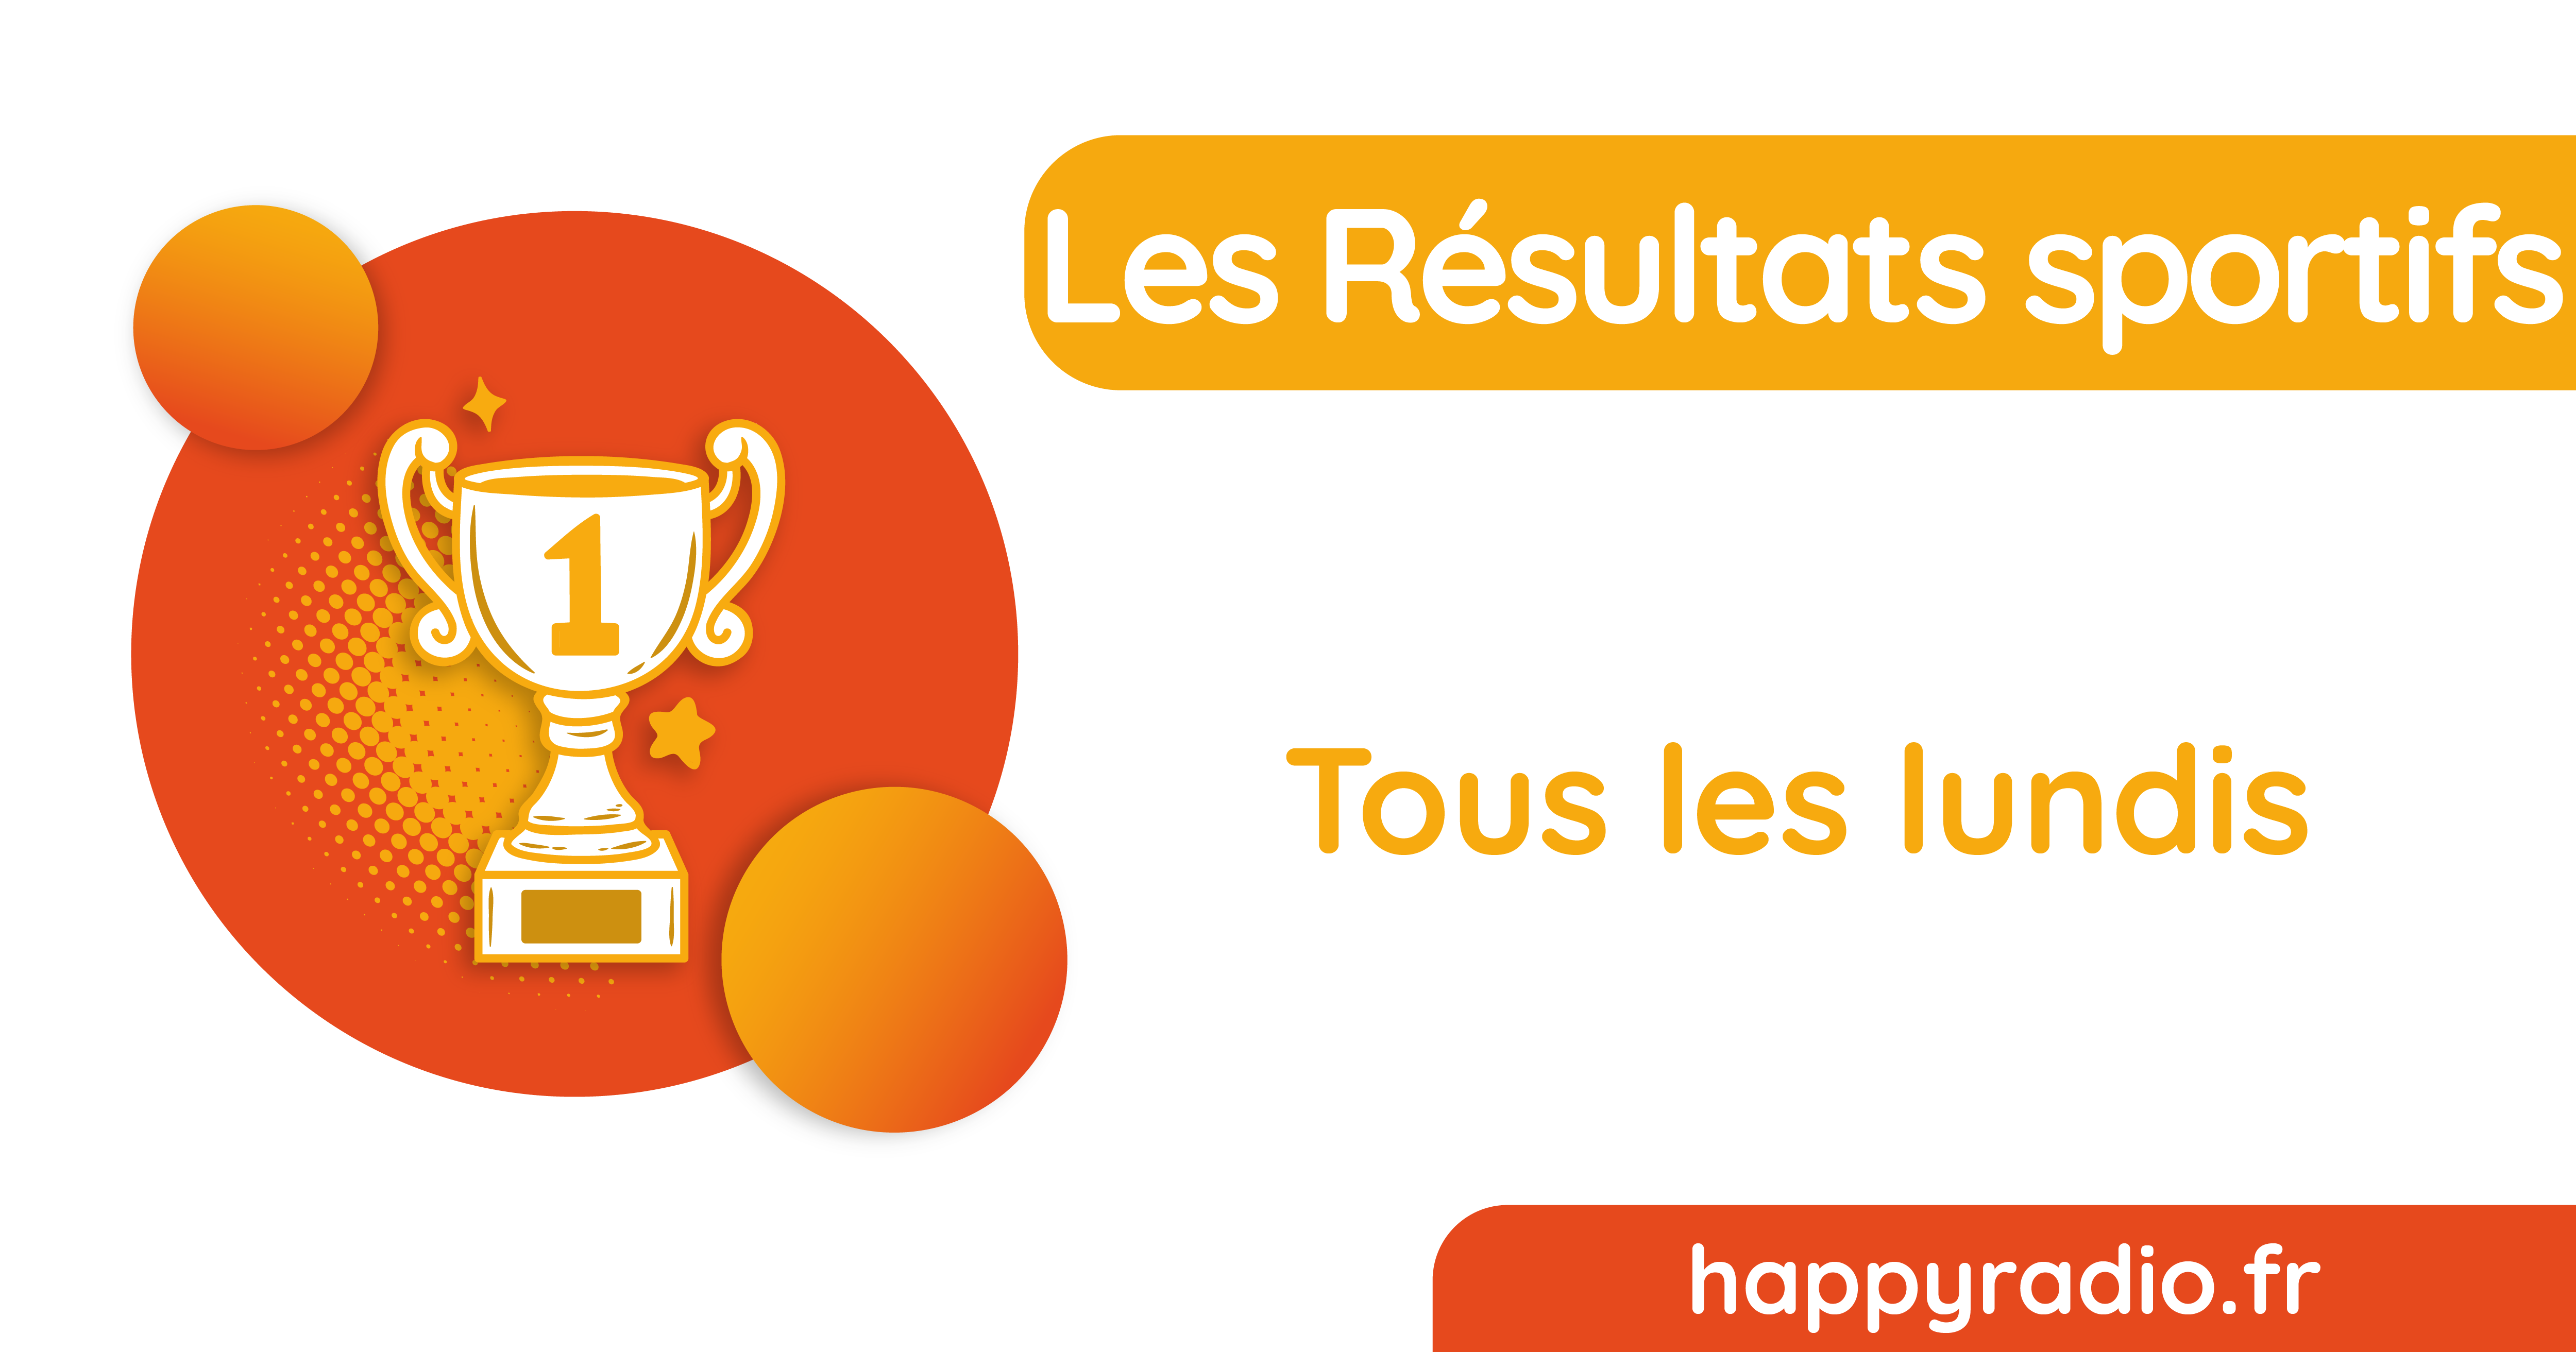 You are currently viewing Les résultats sportifs locaux